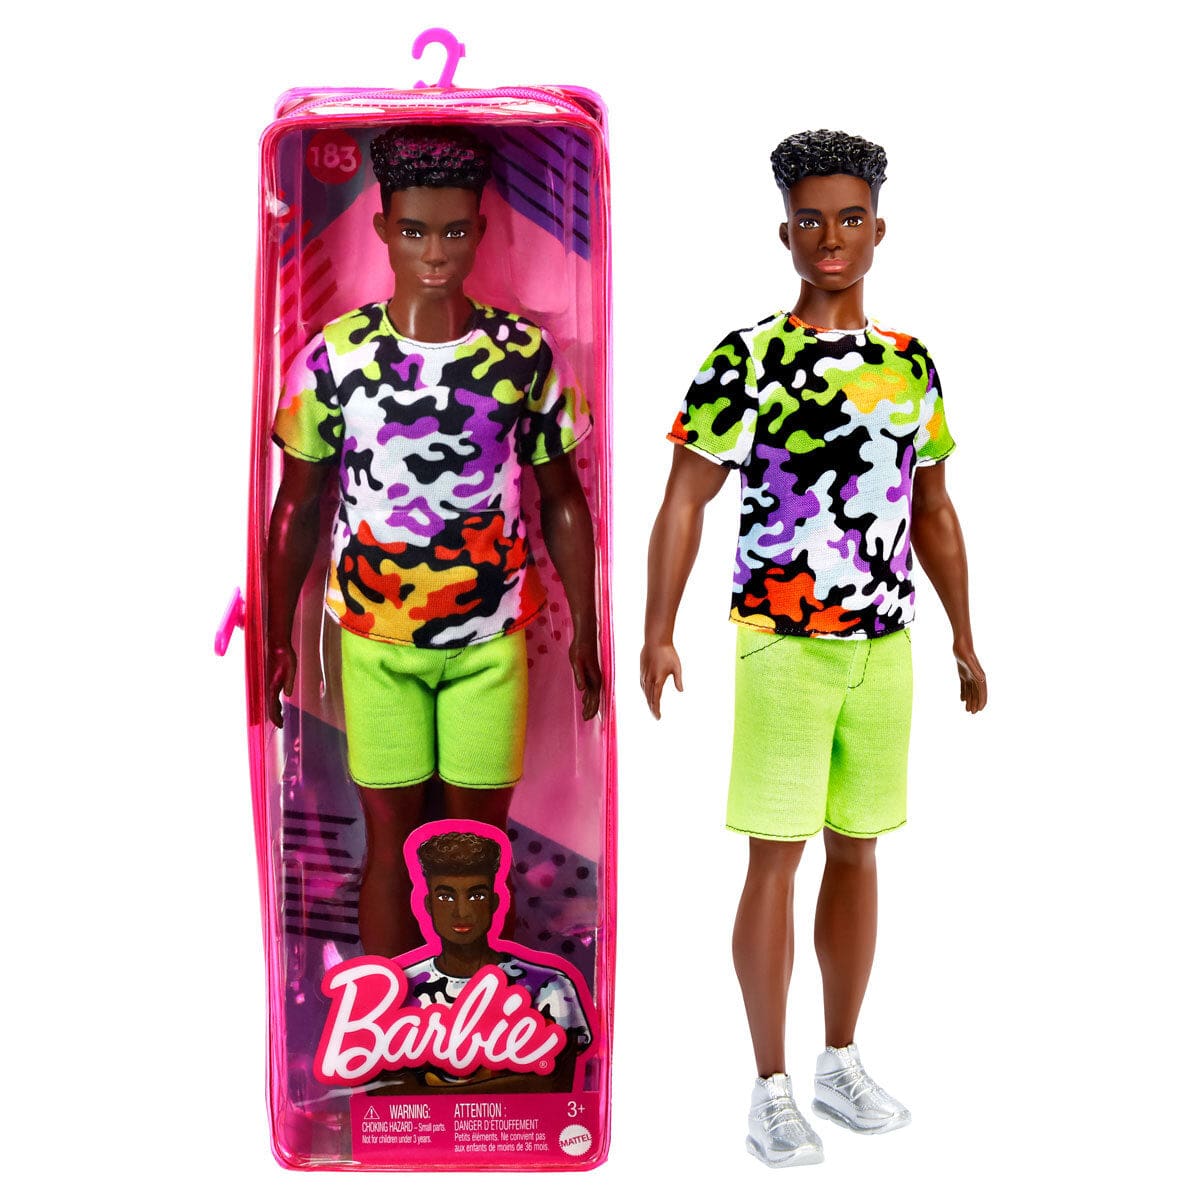 Barbie Looks Doll #18 Ken with Yellow Shirt